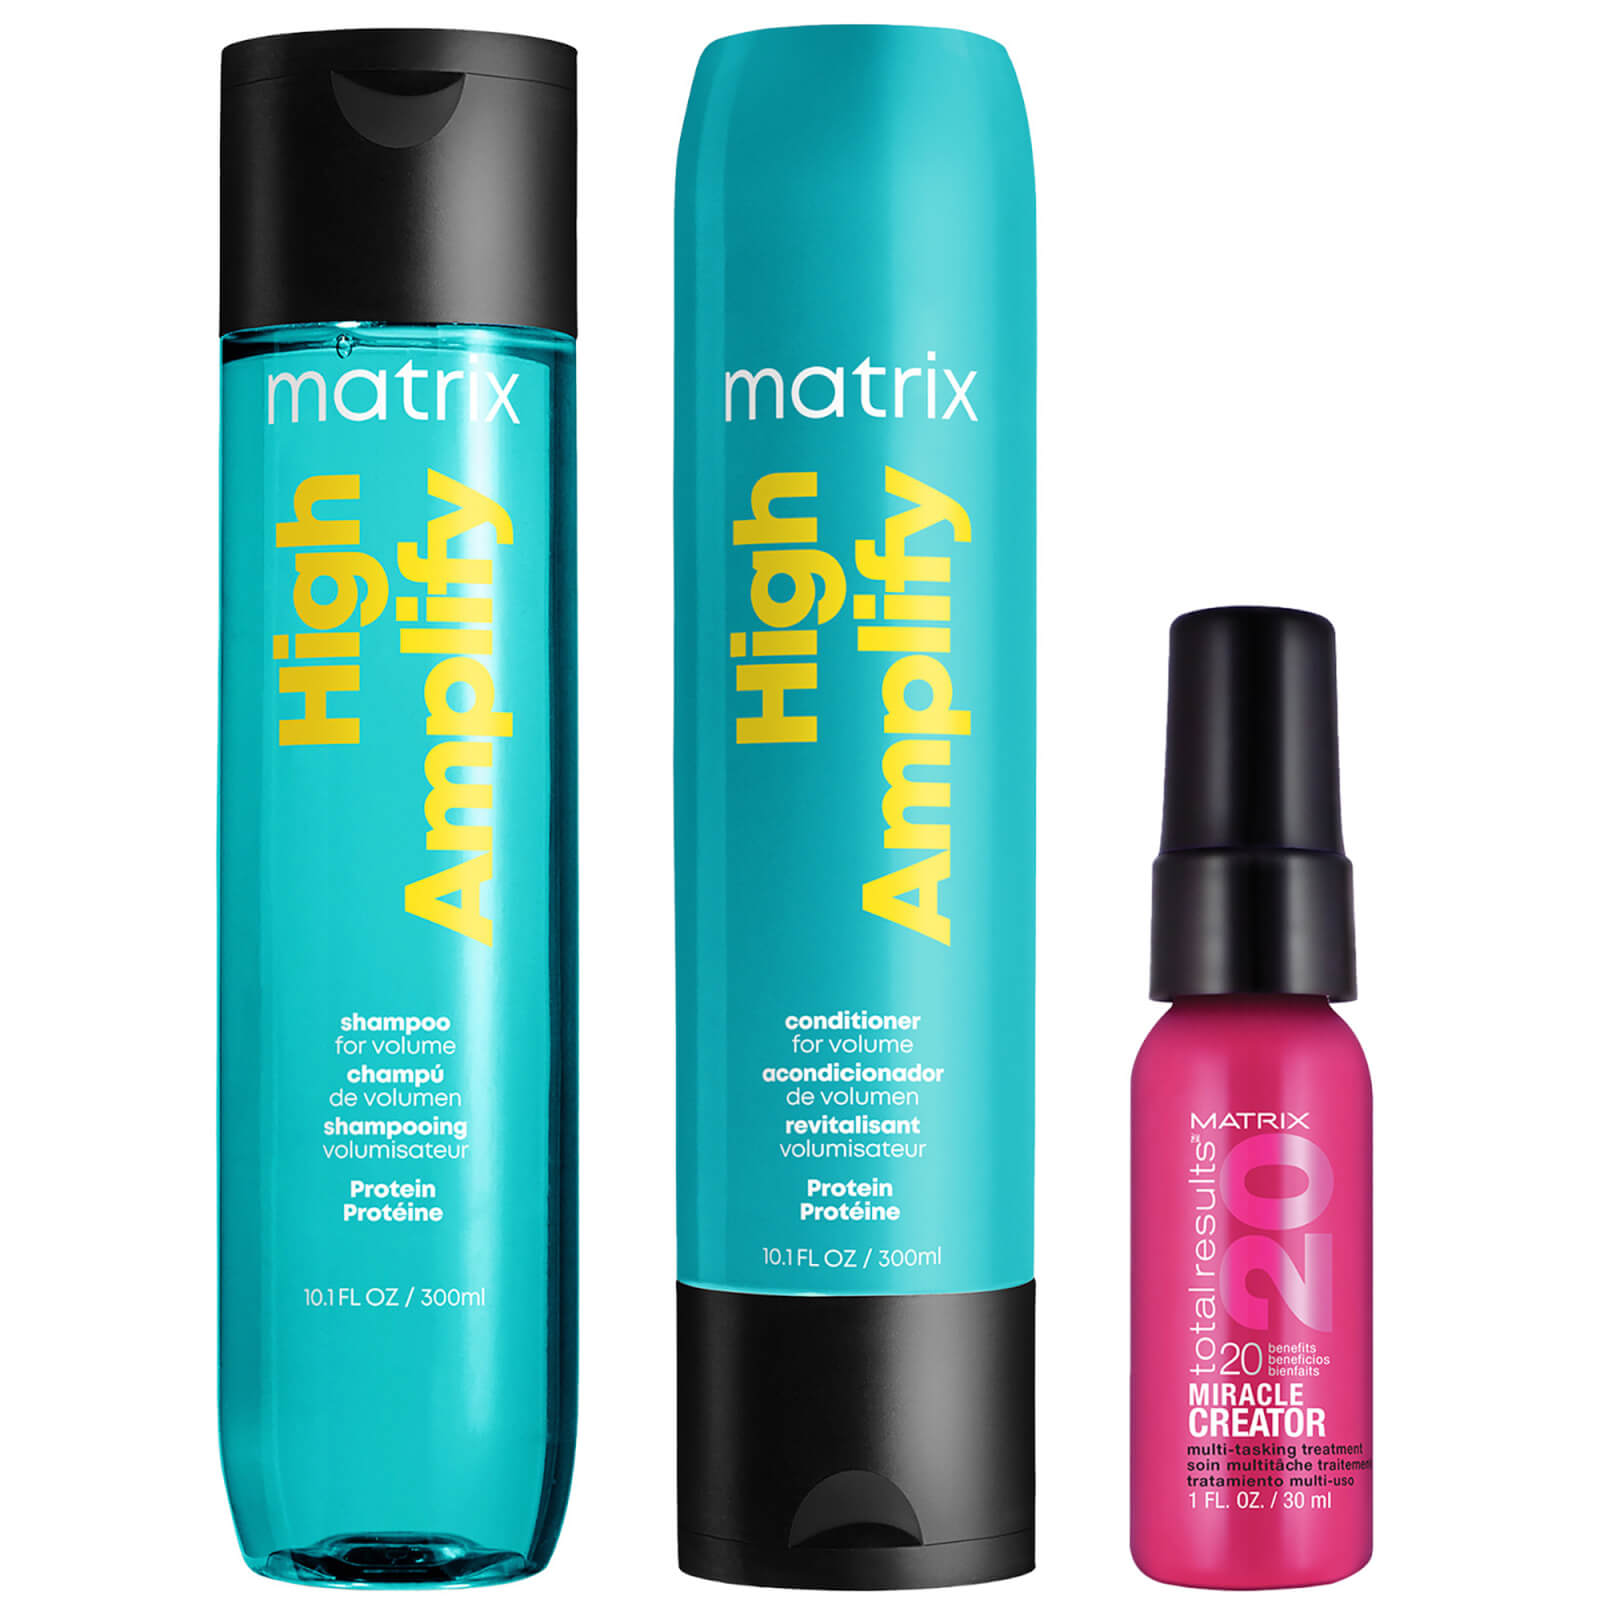 Image of Matrix High Amplify Shampoo, Conditioner and Miracle Creator 20 Travel Size Bundle for Fine and Flat Hair